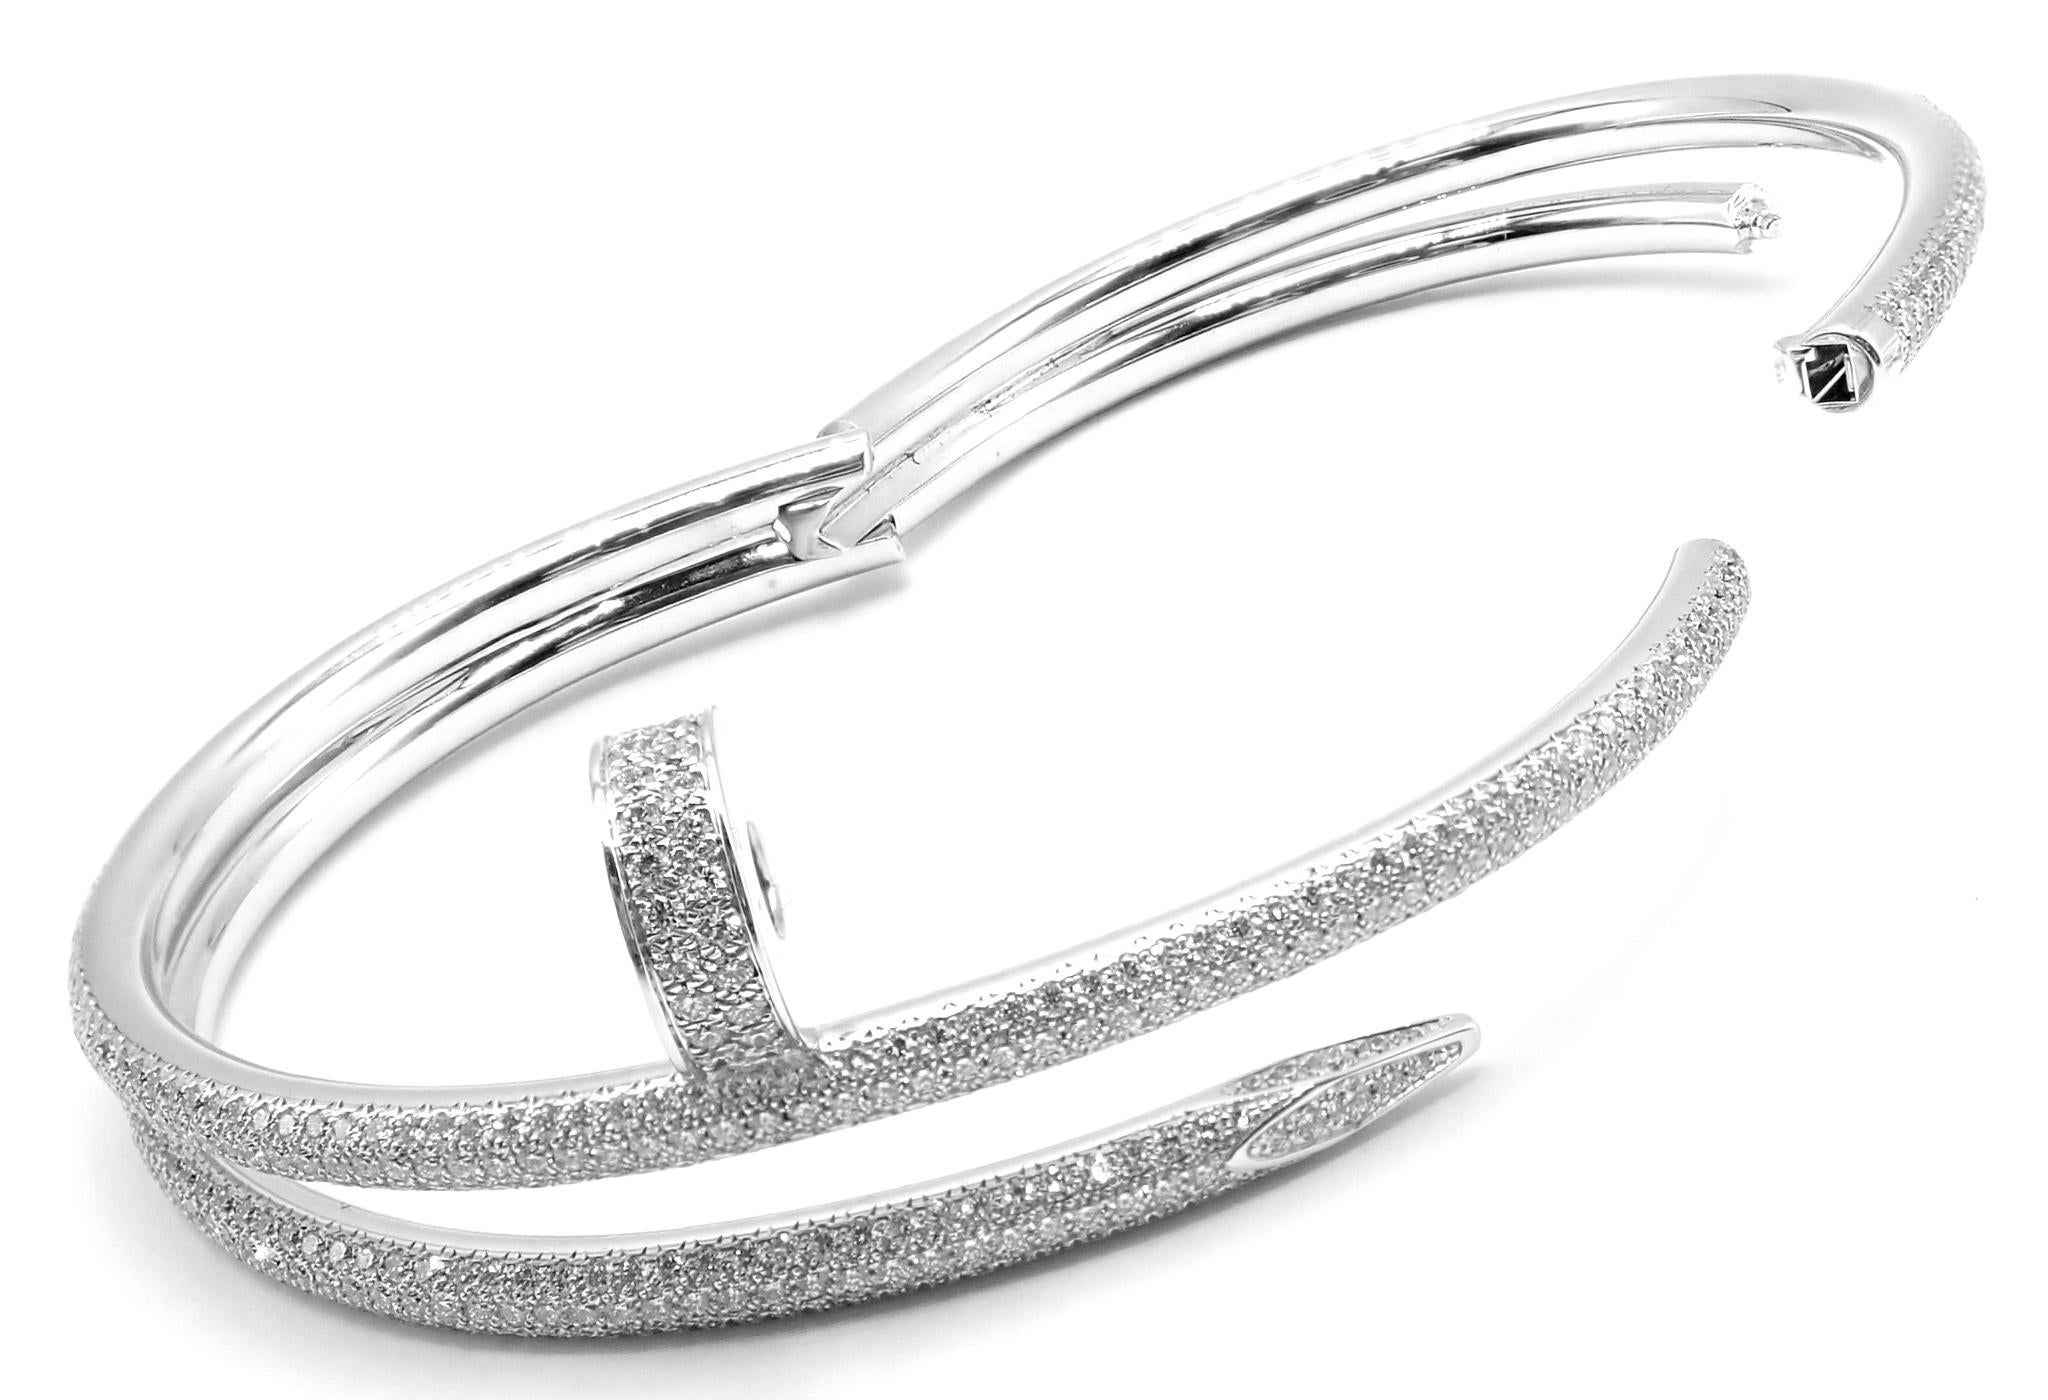 18k White Gold Diamond Juste Un Clou Nail Bangle Bracelet Size 17 by CARTIER. 
This beautiful bracelet comes with its Cartier box and servoce paper from NYC Cartier store.
With 624 round brilliant cut diamonds VVS1 clarity, E color total weight